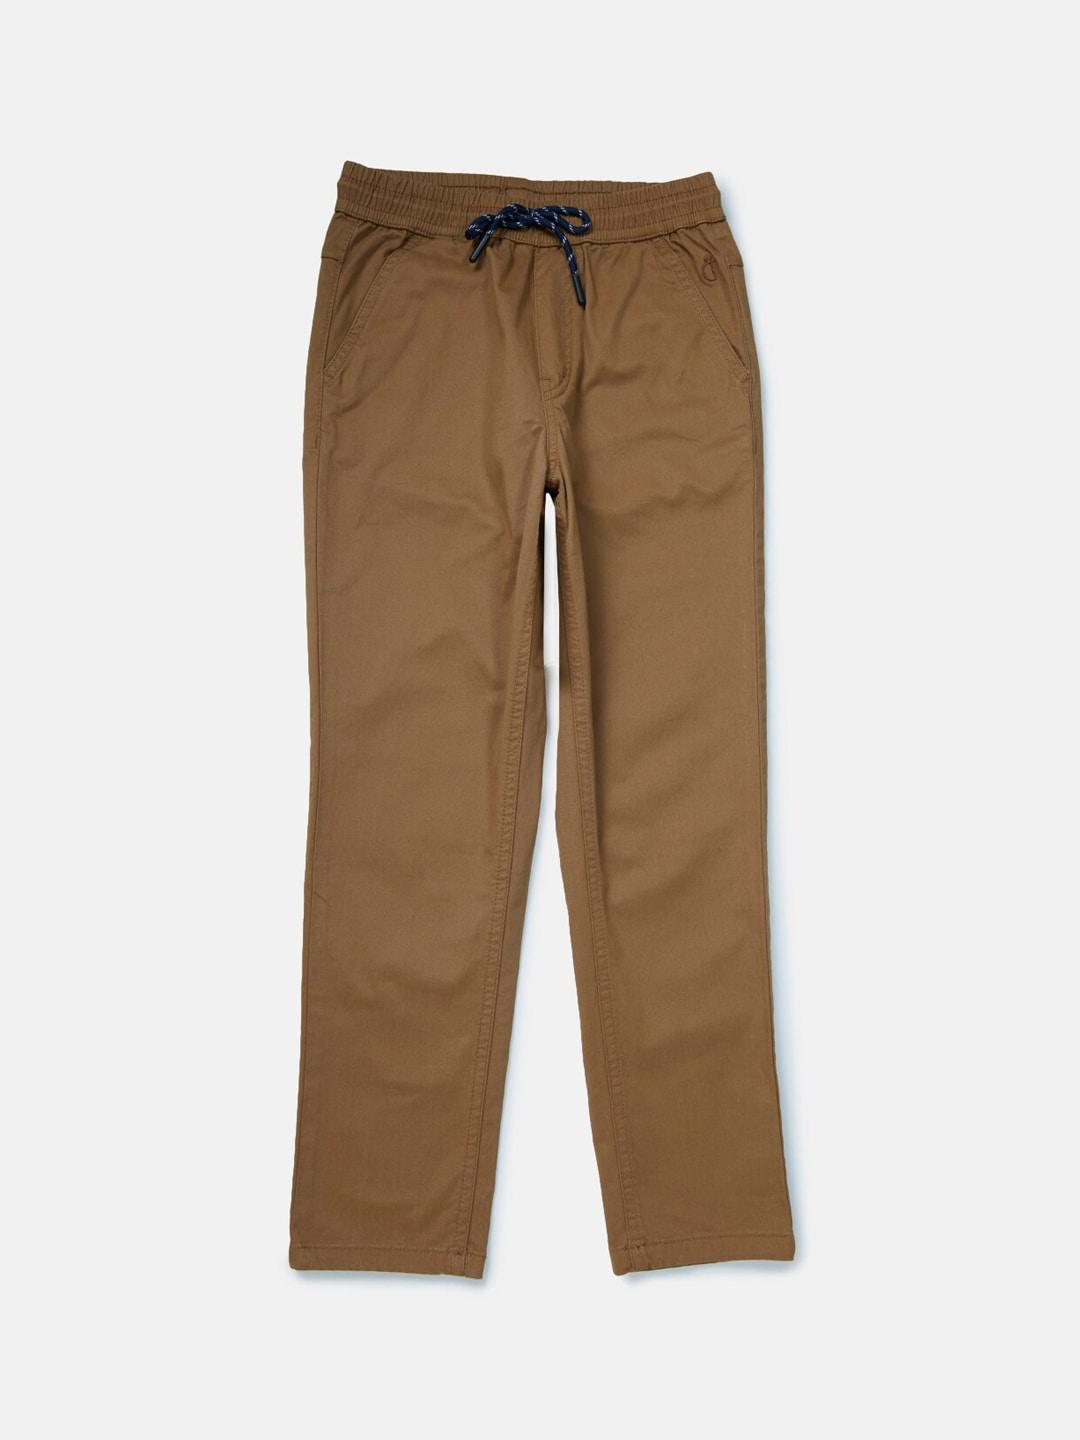 Gini and Jony Boys Brown Chinos Trousers